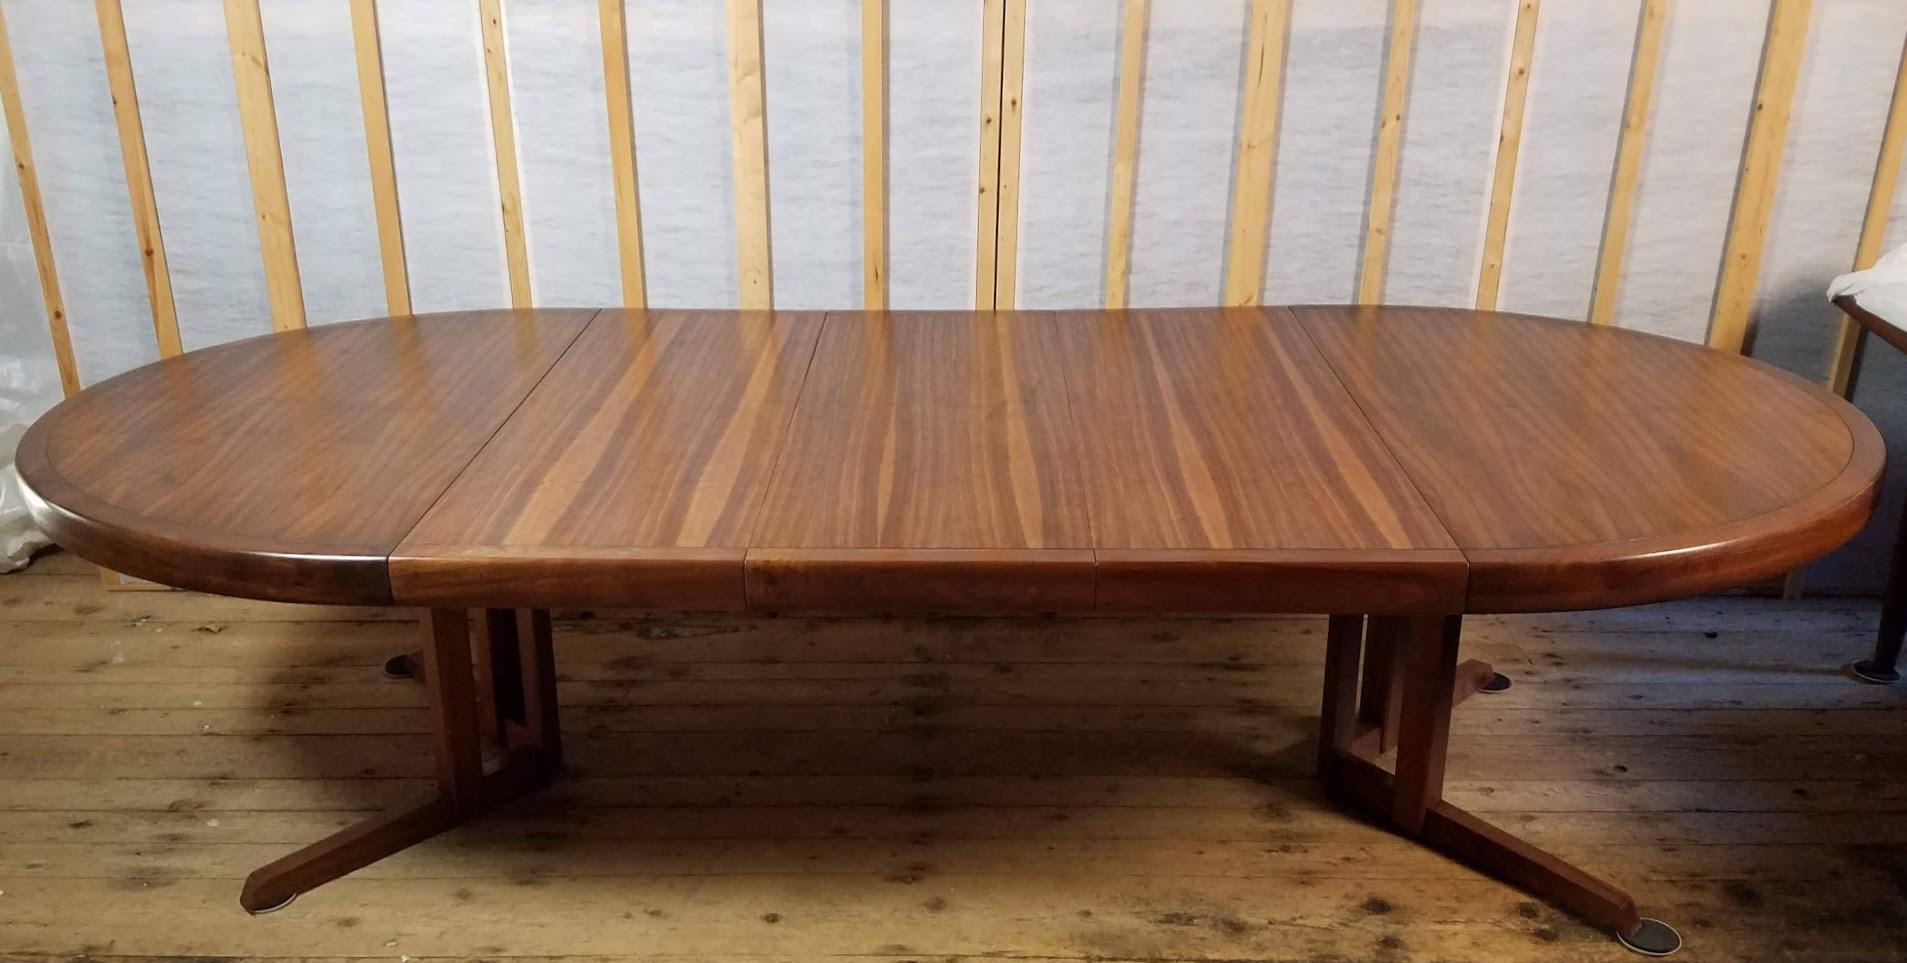 An extendable walnut dining table by George Nakashima for Widdicomb Furniture Company from 1960.
A line of book-matched veneers encased by a 3 inch deep carved and finger joined solid walnut edge gives the top of the table an interesting